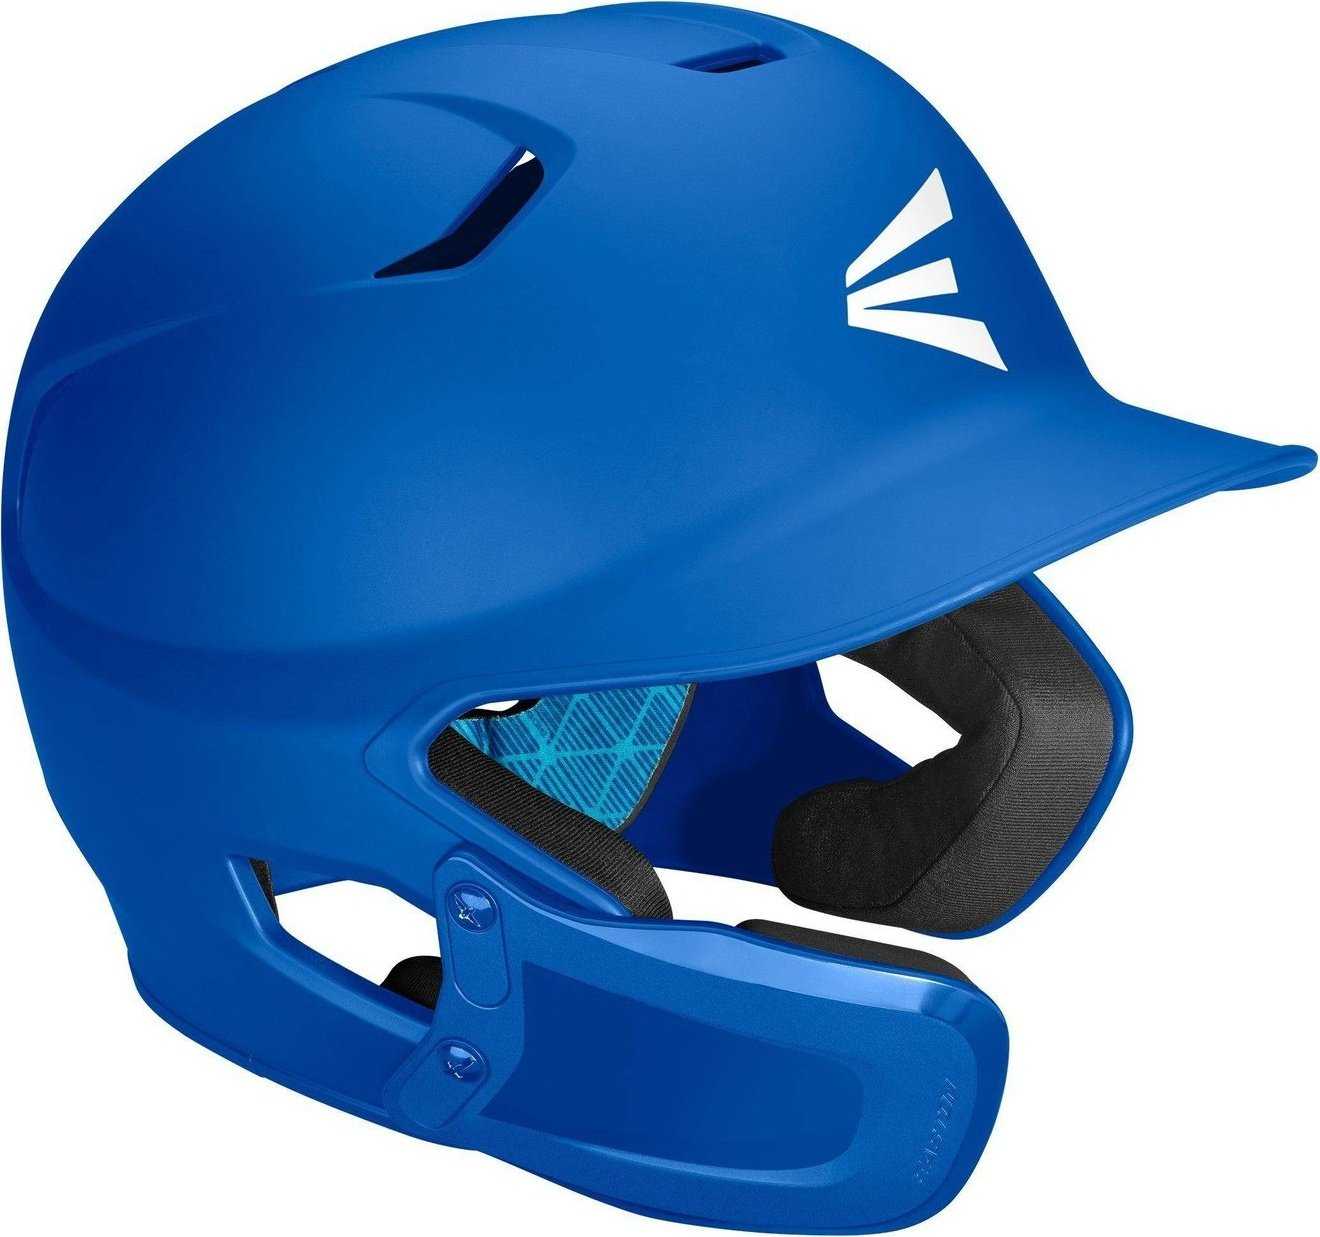 Easton Z5 2.0 Solid Batting Helmet with Universal Jaw Guard - Royal - HIT A Double